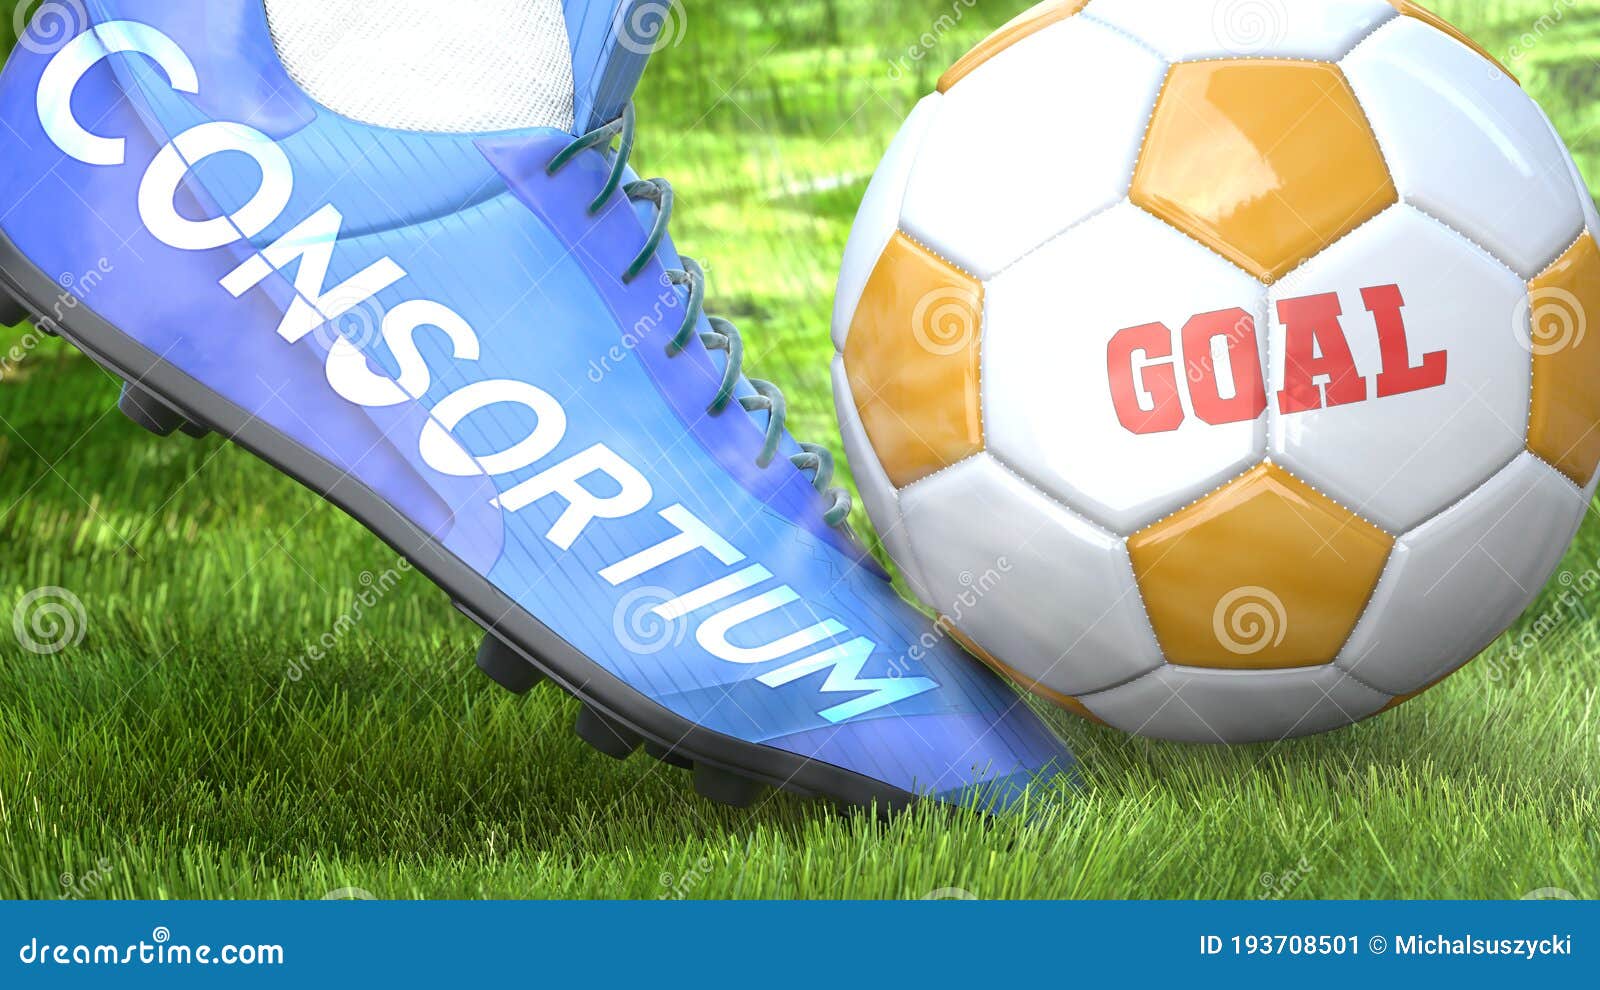 consortium and a life goal - pictured as word consortium on a football shoe to ize that consortium can impact a goal and is